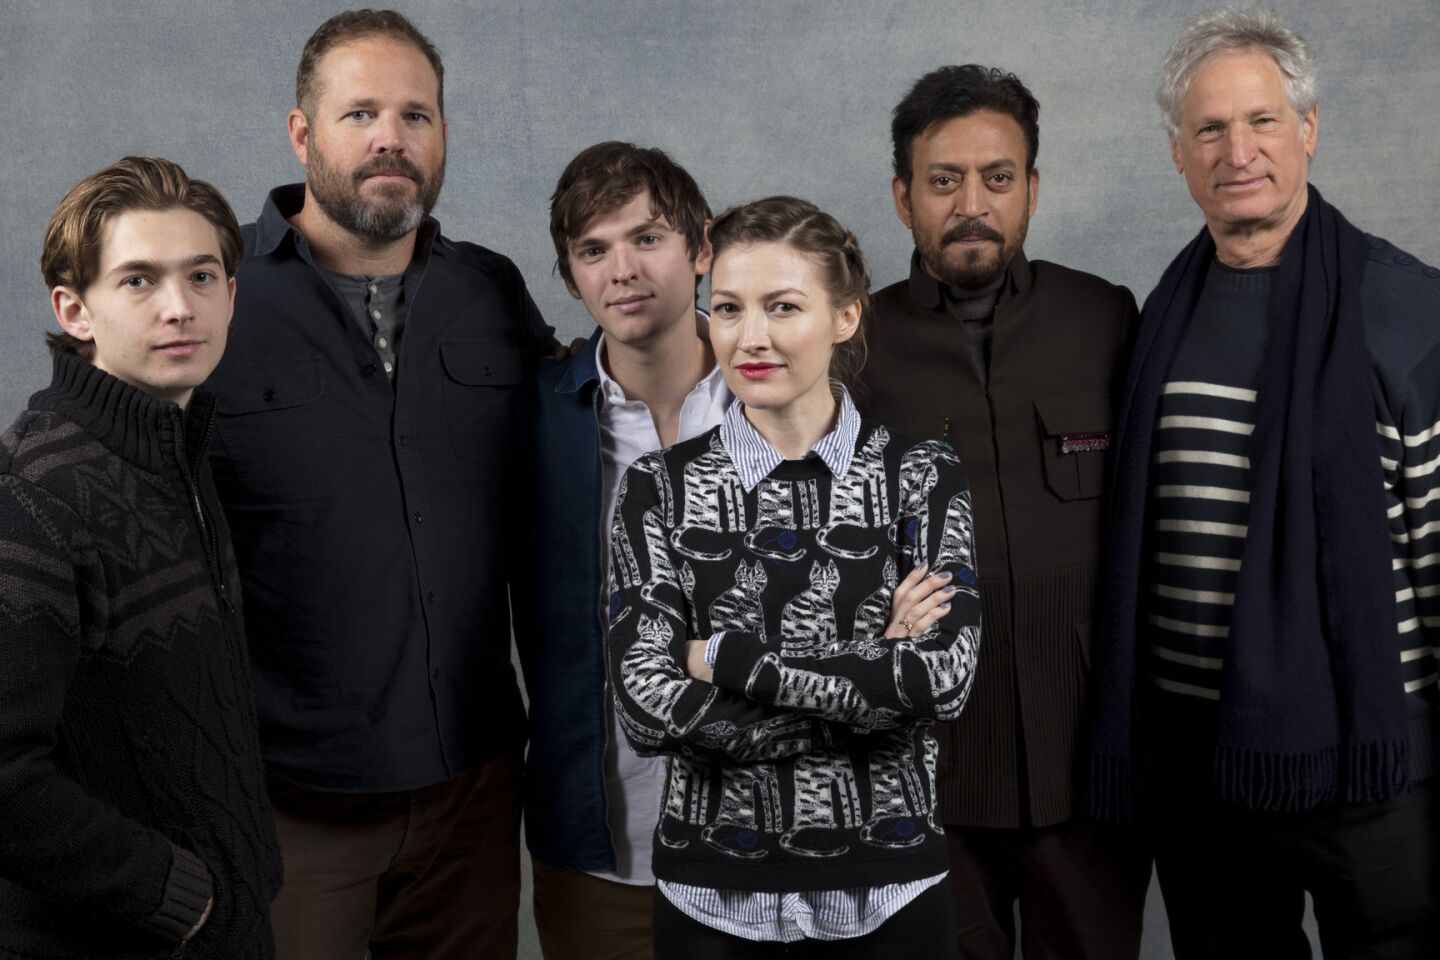 Actor Austin Abrams, left, actor David Denman, actor Bubba Weiler, actress Kelly Macdonald, actor Irrfan Khan and writer-director Marc Tutrletaub, from the film "Puzzle."